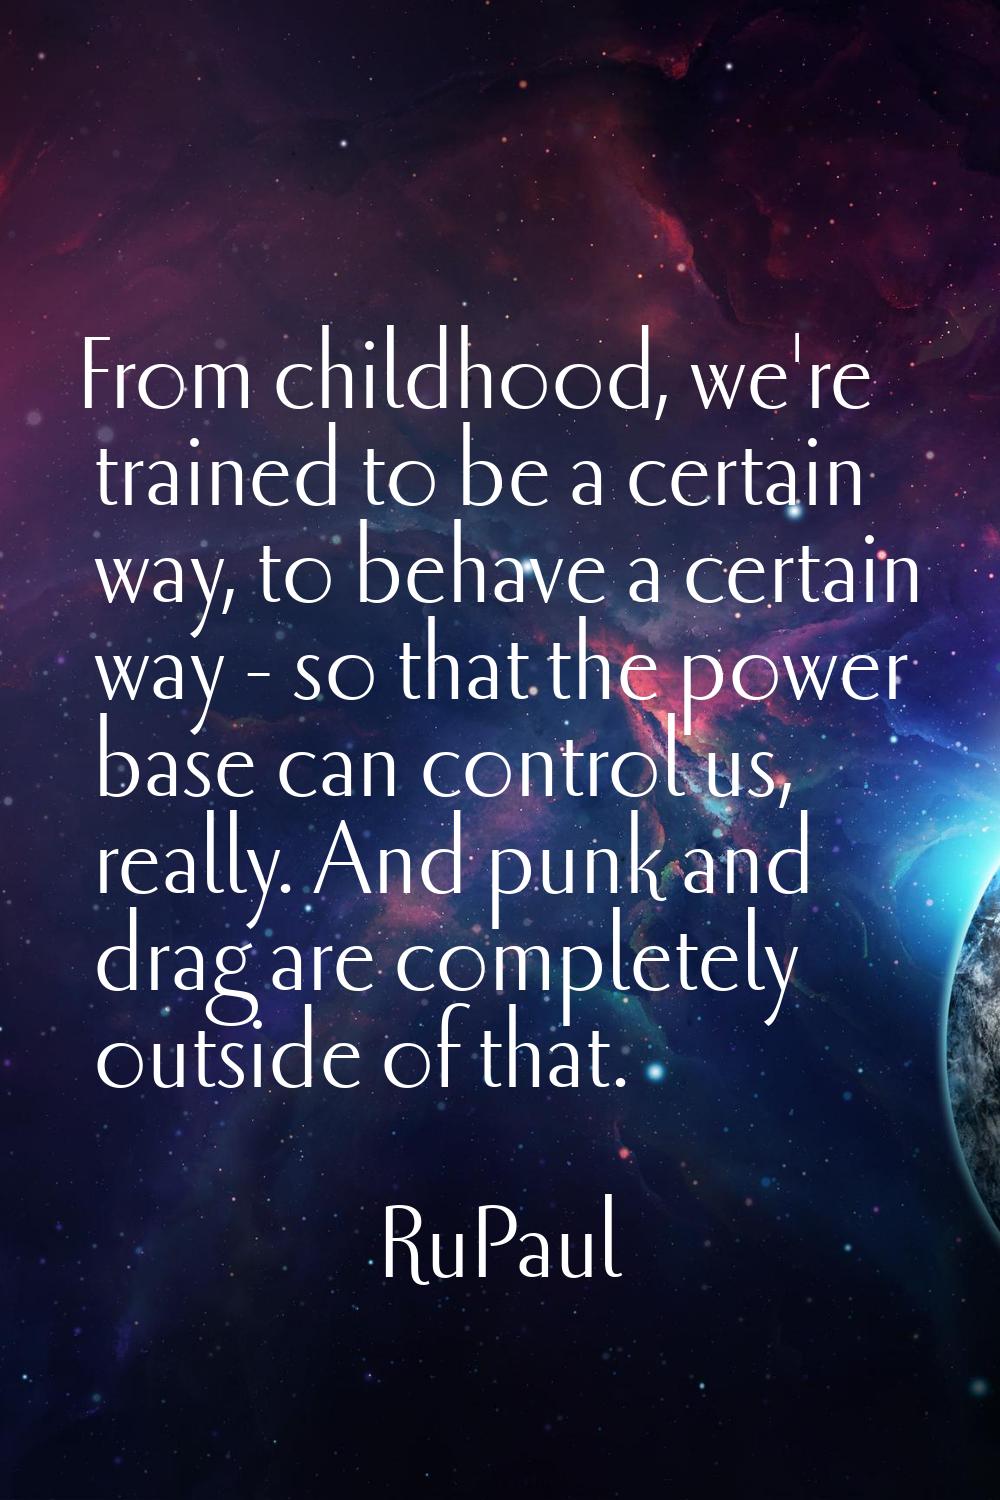 From childhood, we're trained to be a certain way, to behave a certain way - so that the power base